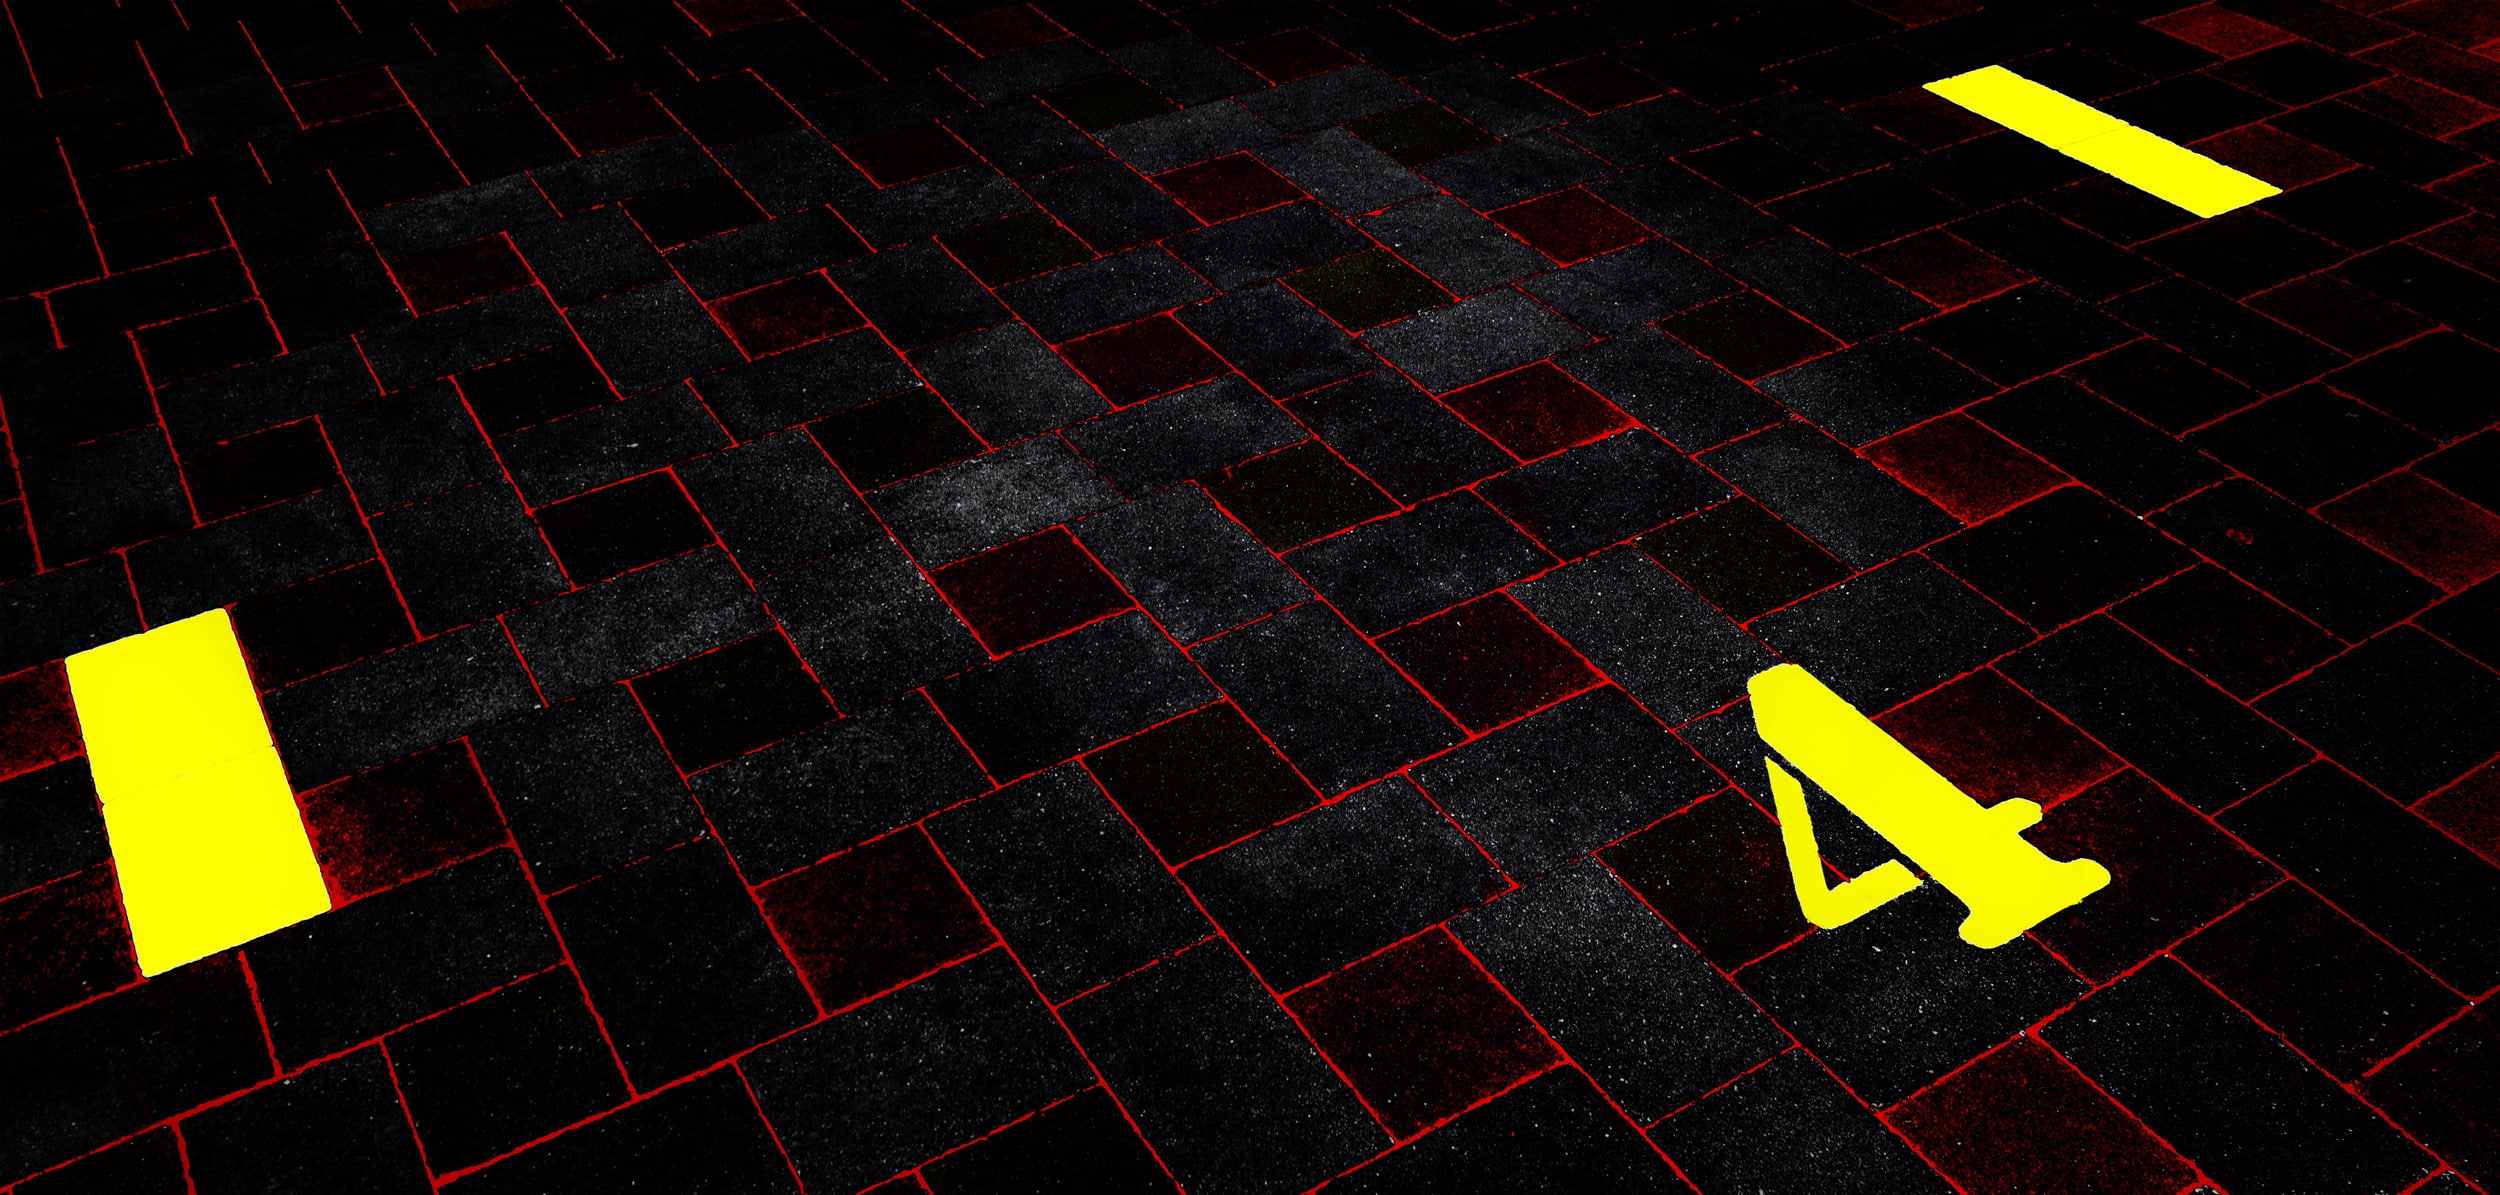 digital art, numbers, texture, high angle view, yellow, sign